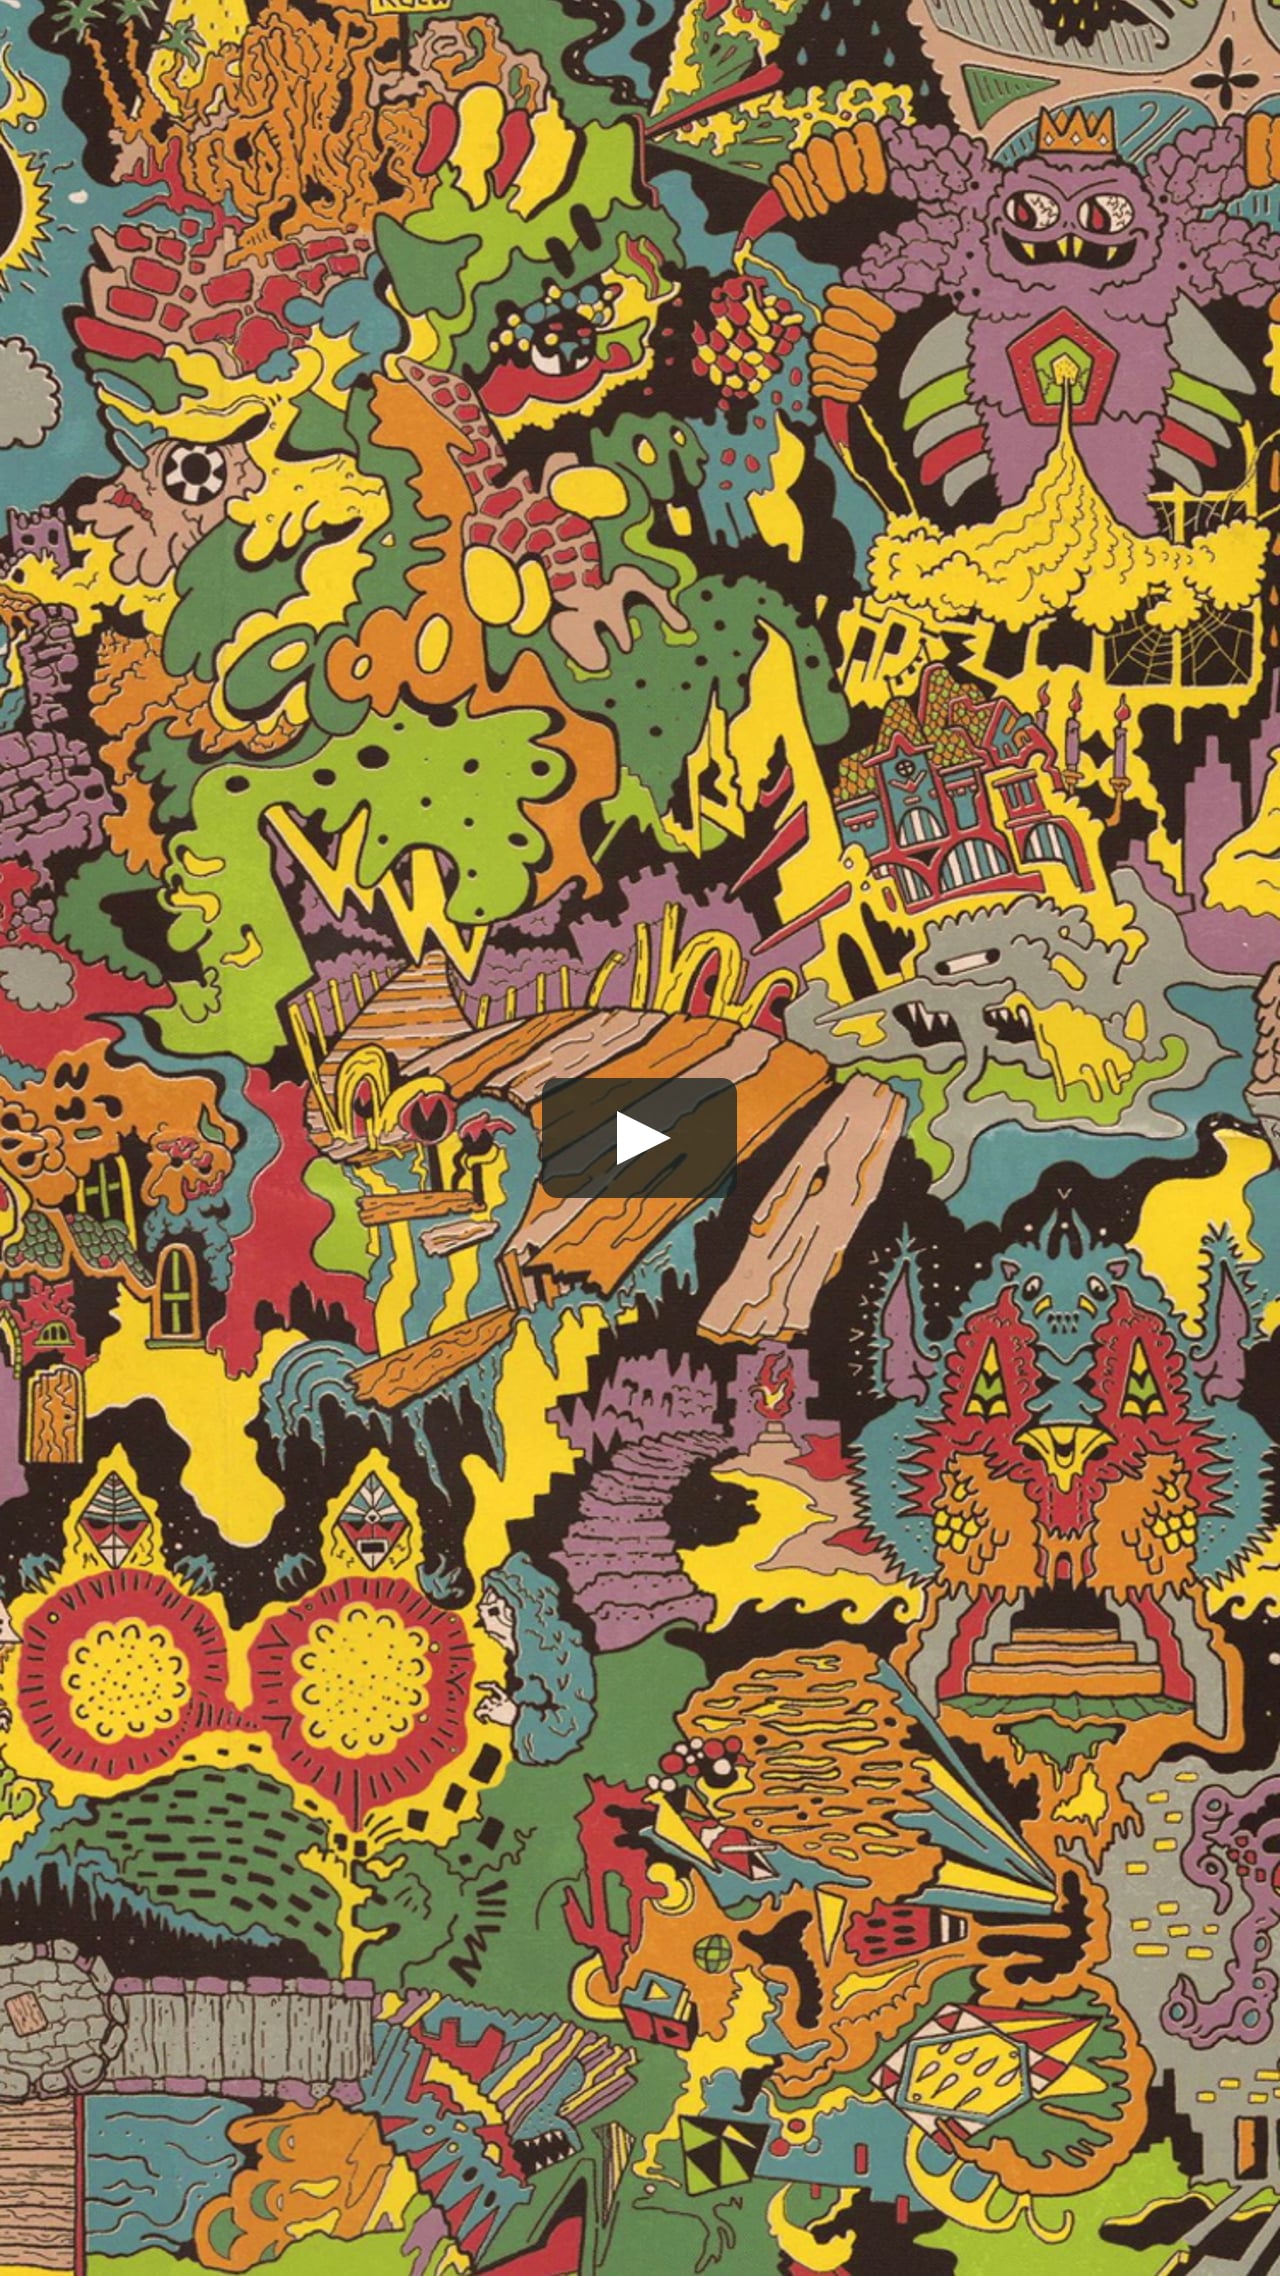 King Gizzard and the Lizard Wizard iPhone 8 Wallpaper on Vimeo